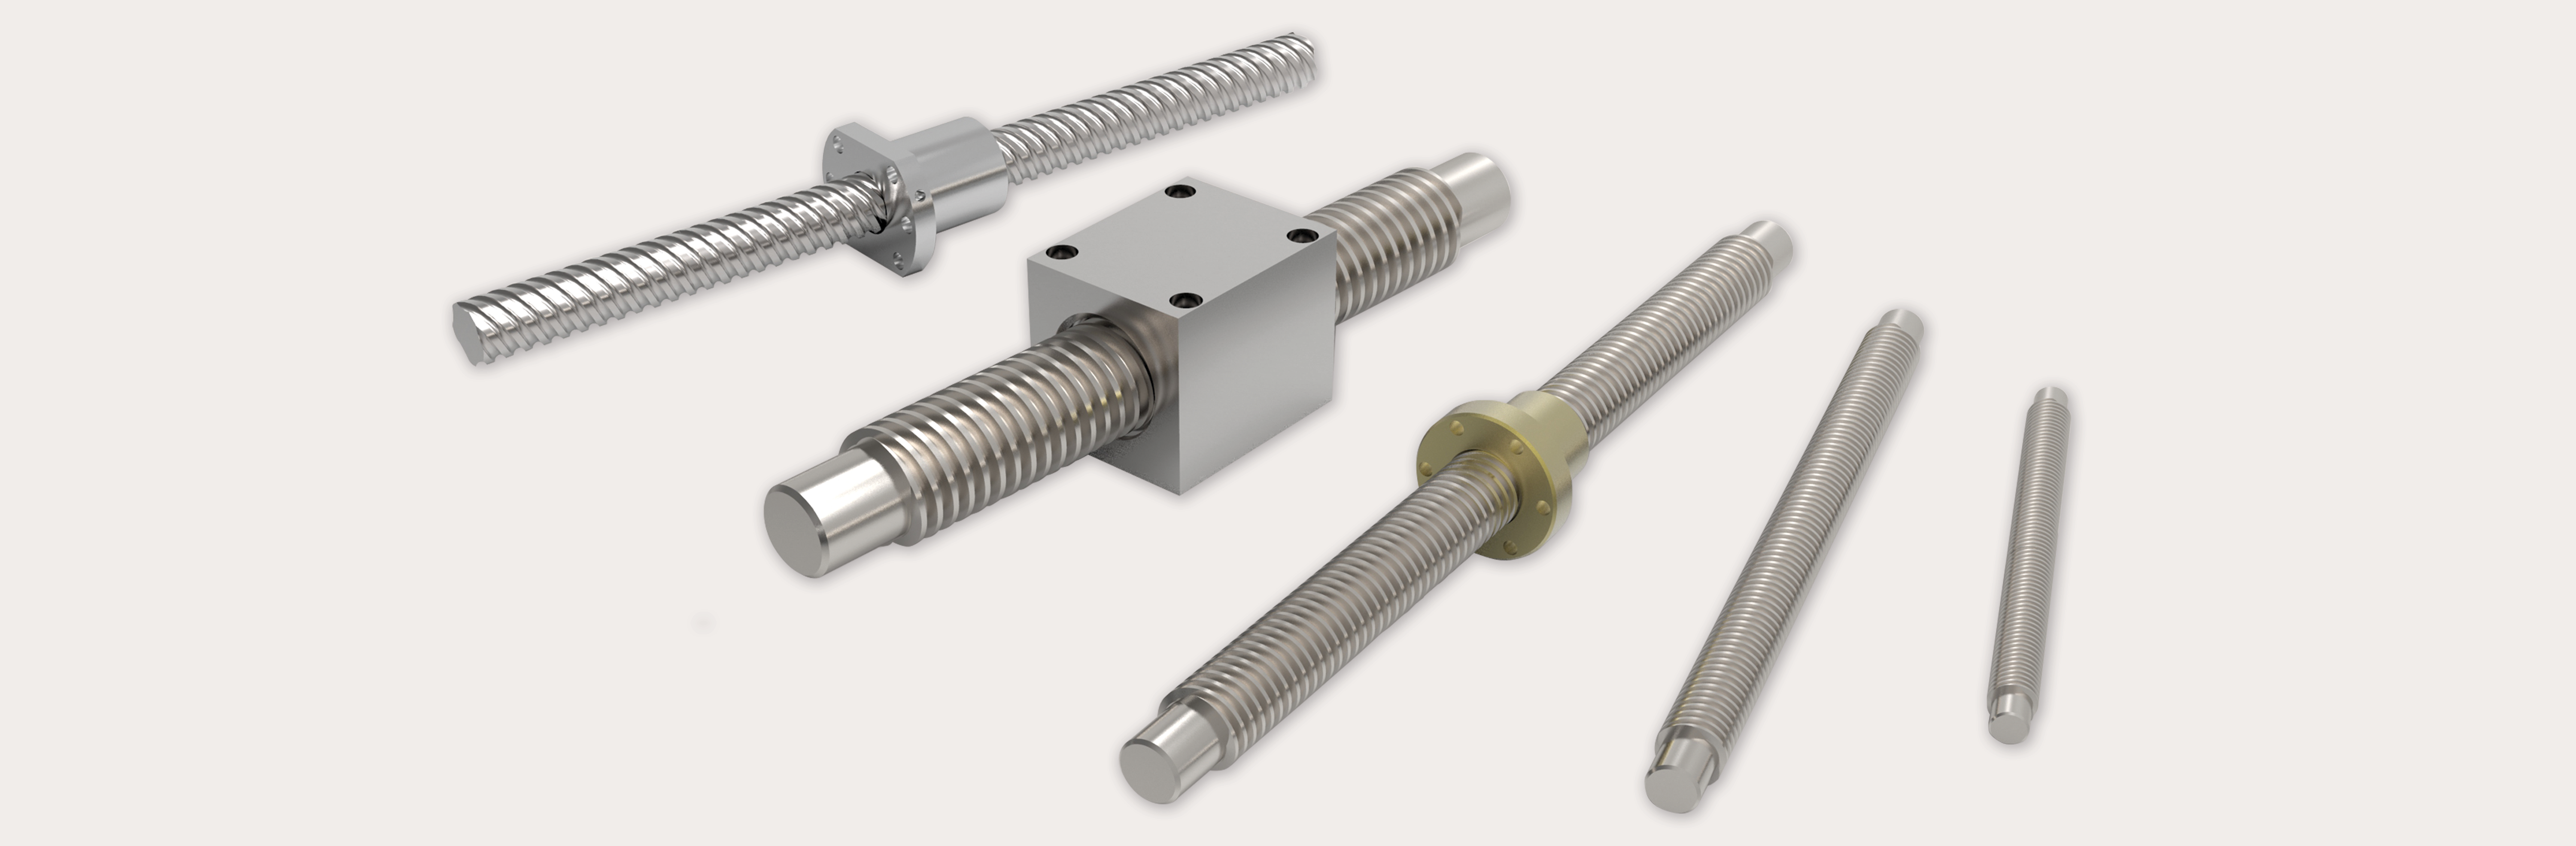 A variety of lead screws and lead nuts from Automotion Components